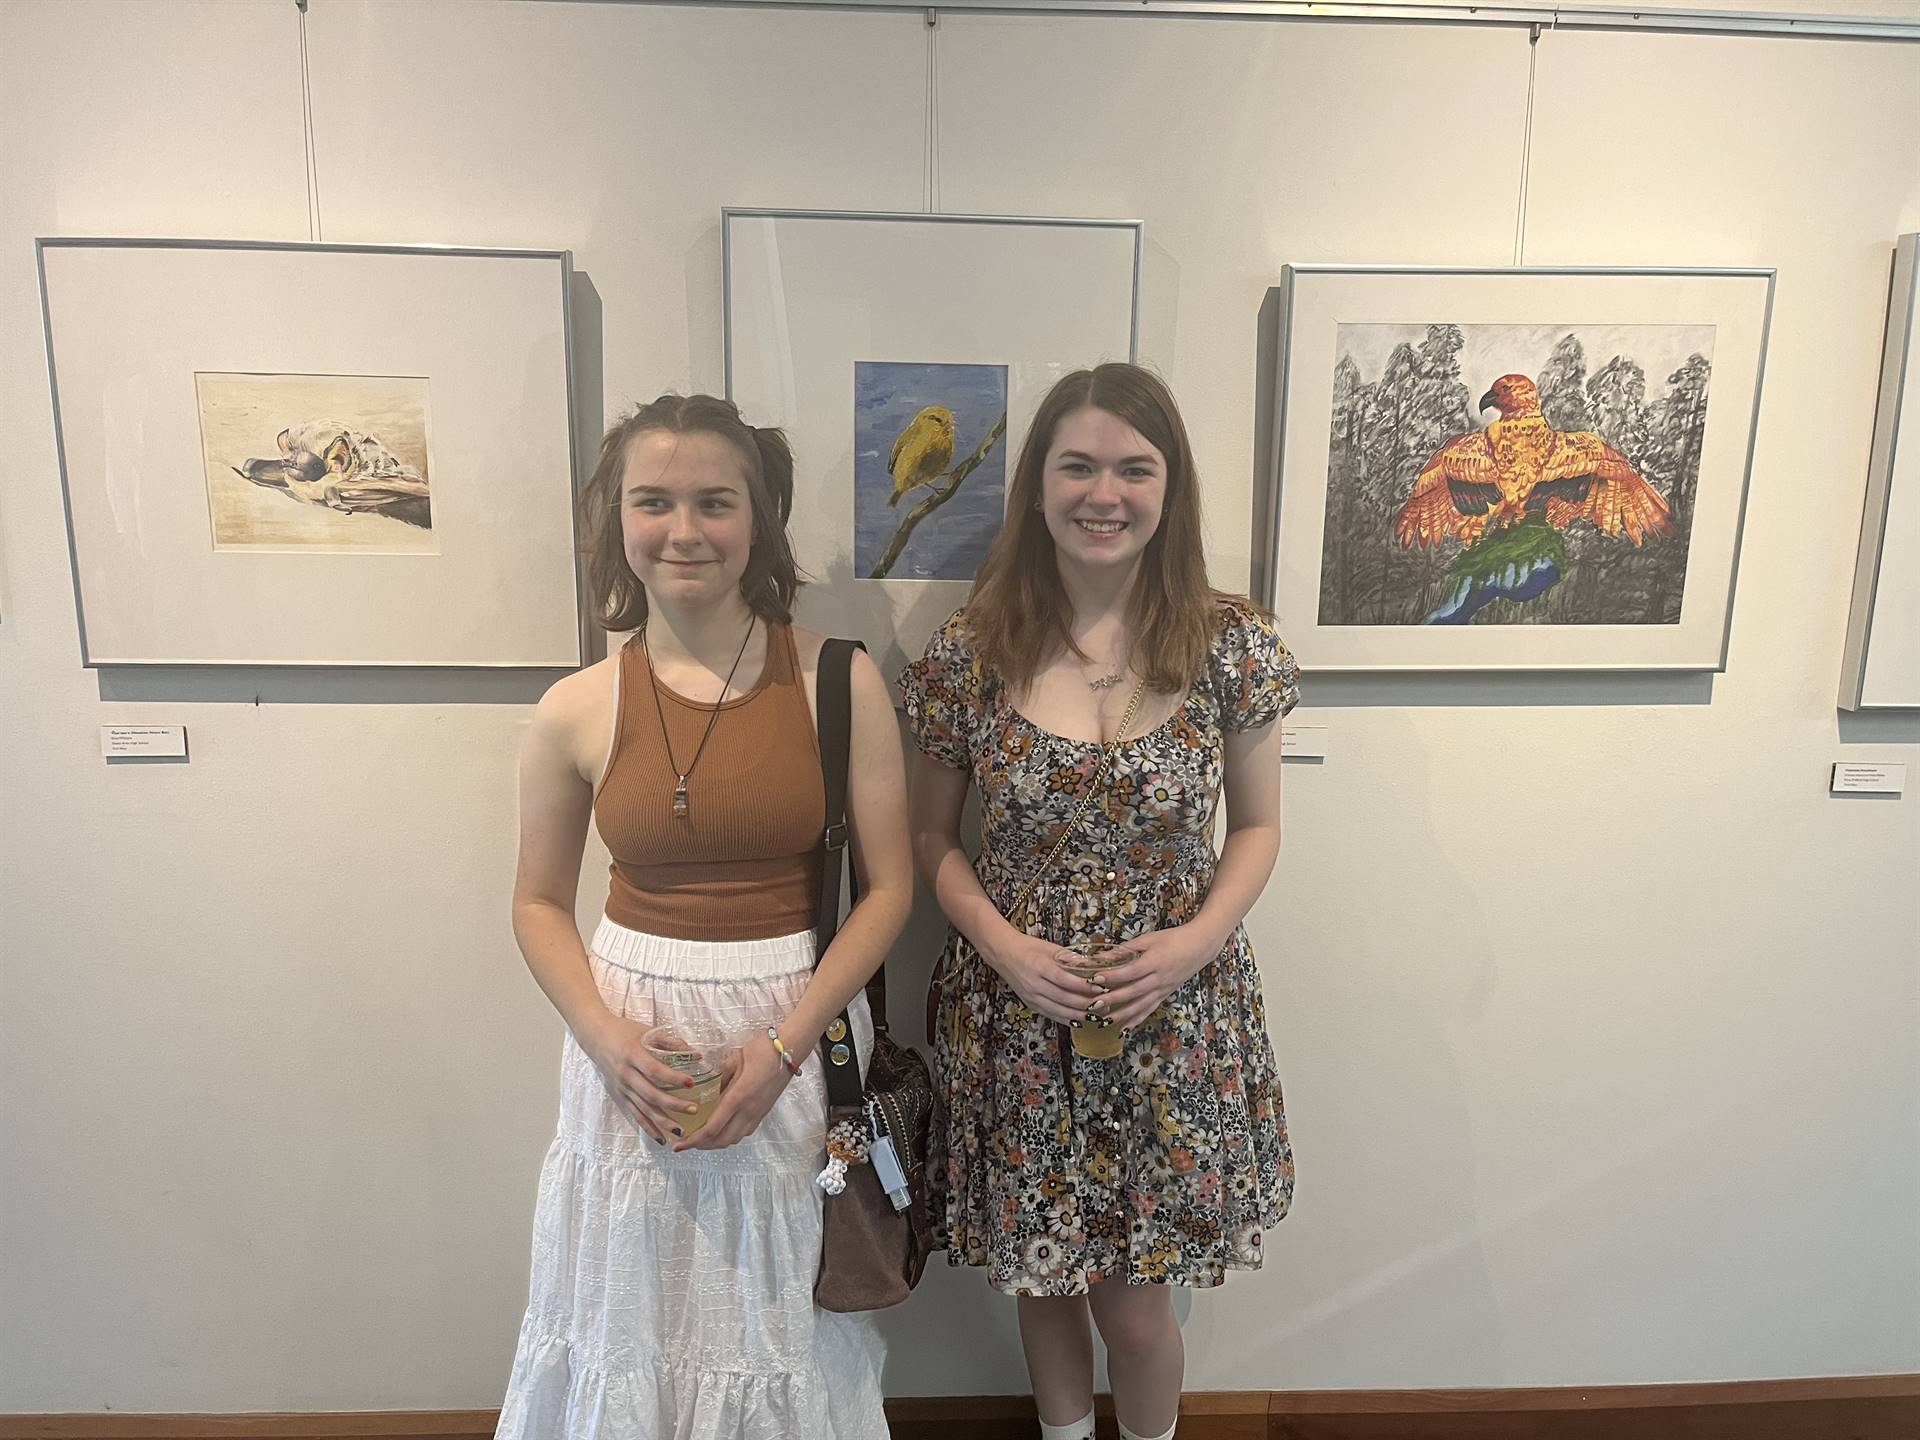 Elise W and Allison L with their artwork